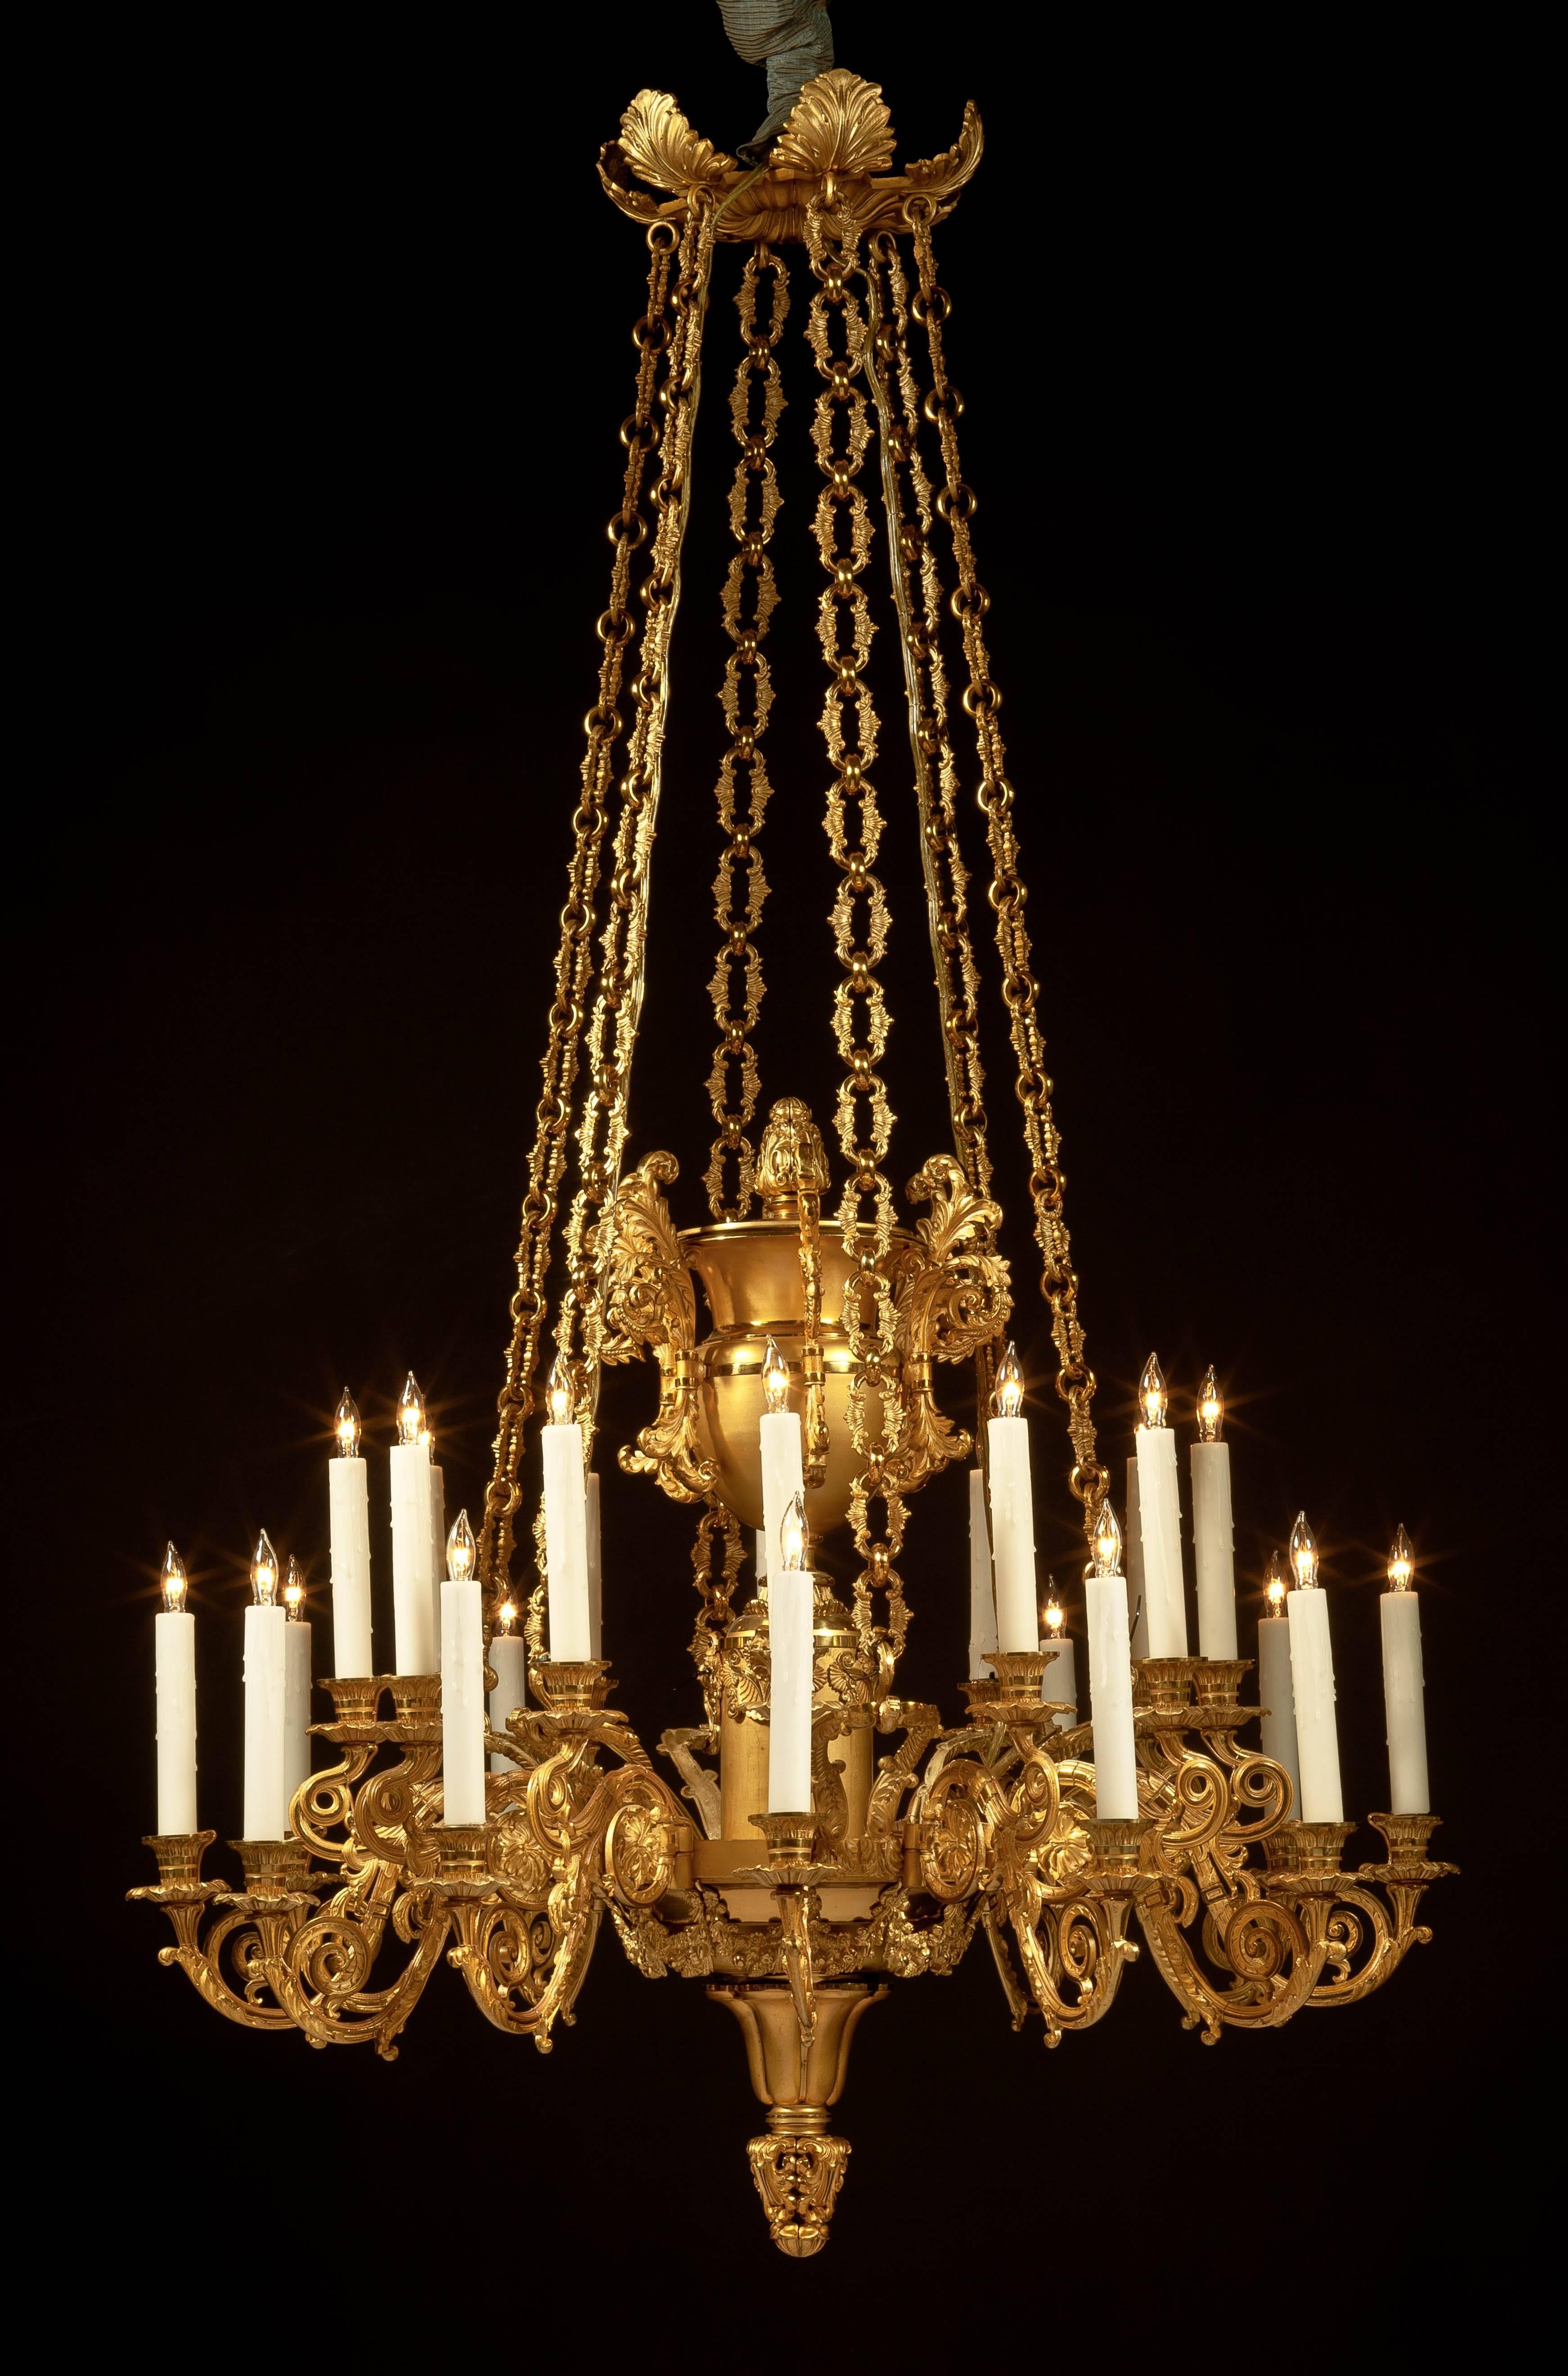 Rare and fine lacquered brass twenty-four-light chandelier.
Attributed to Messenger & Son, (active 1828-1831).
Birmingham & London, England, circa 1830.

The foliate canopy above six massive chains suspending a fixture with twelve arms, each